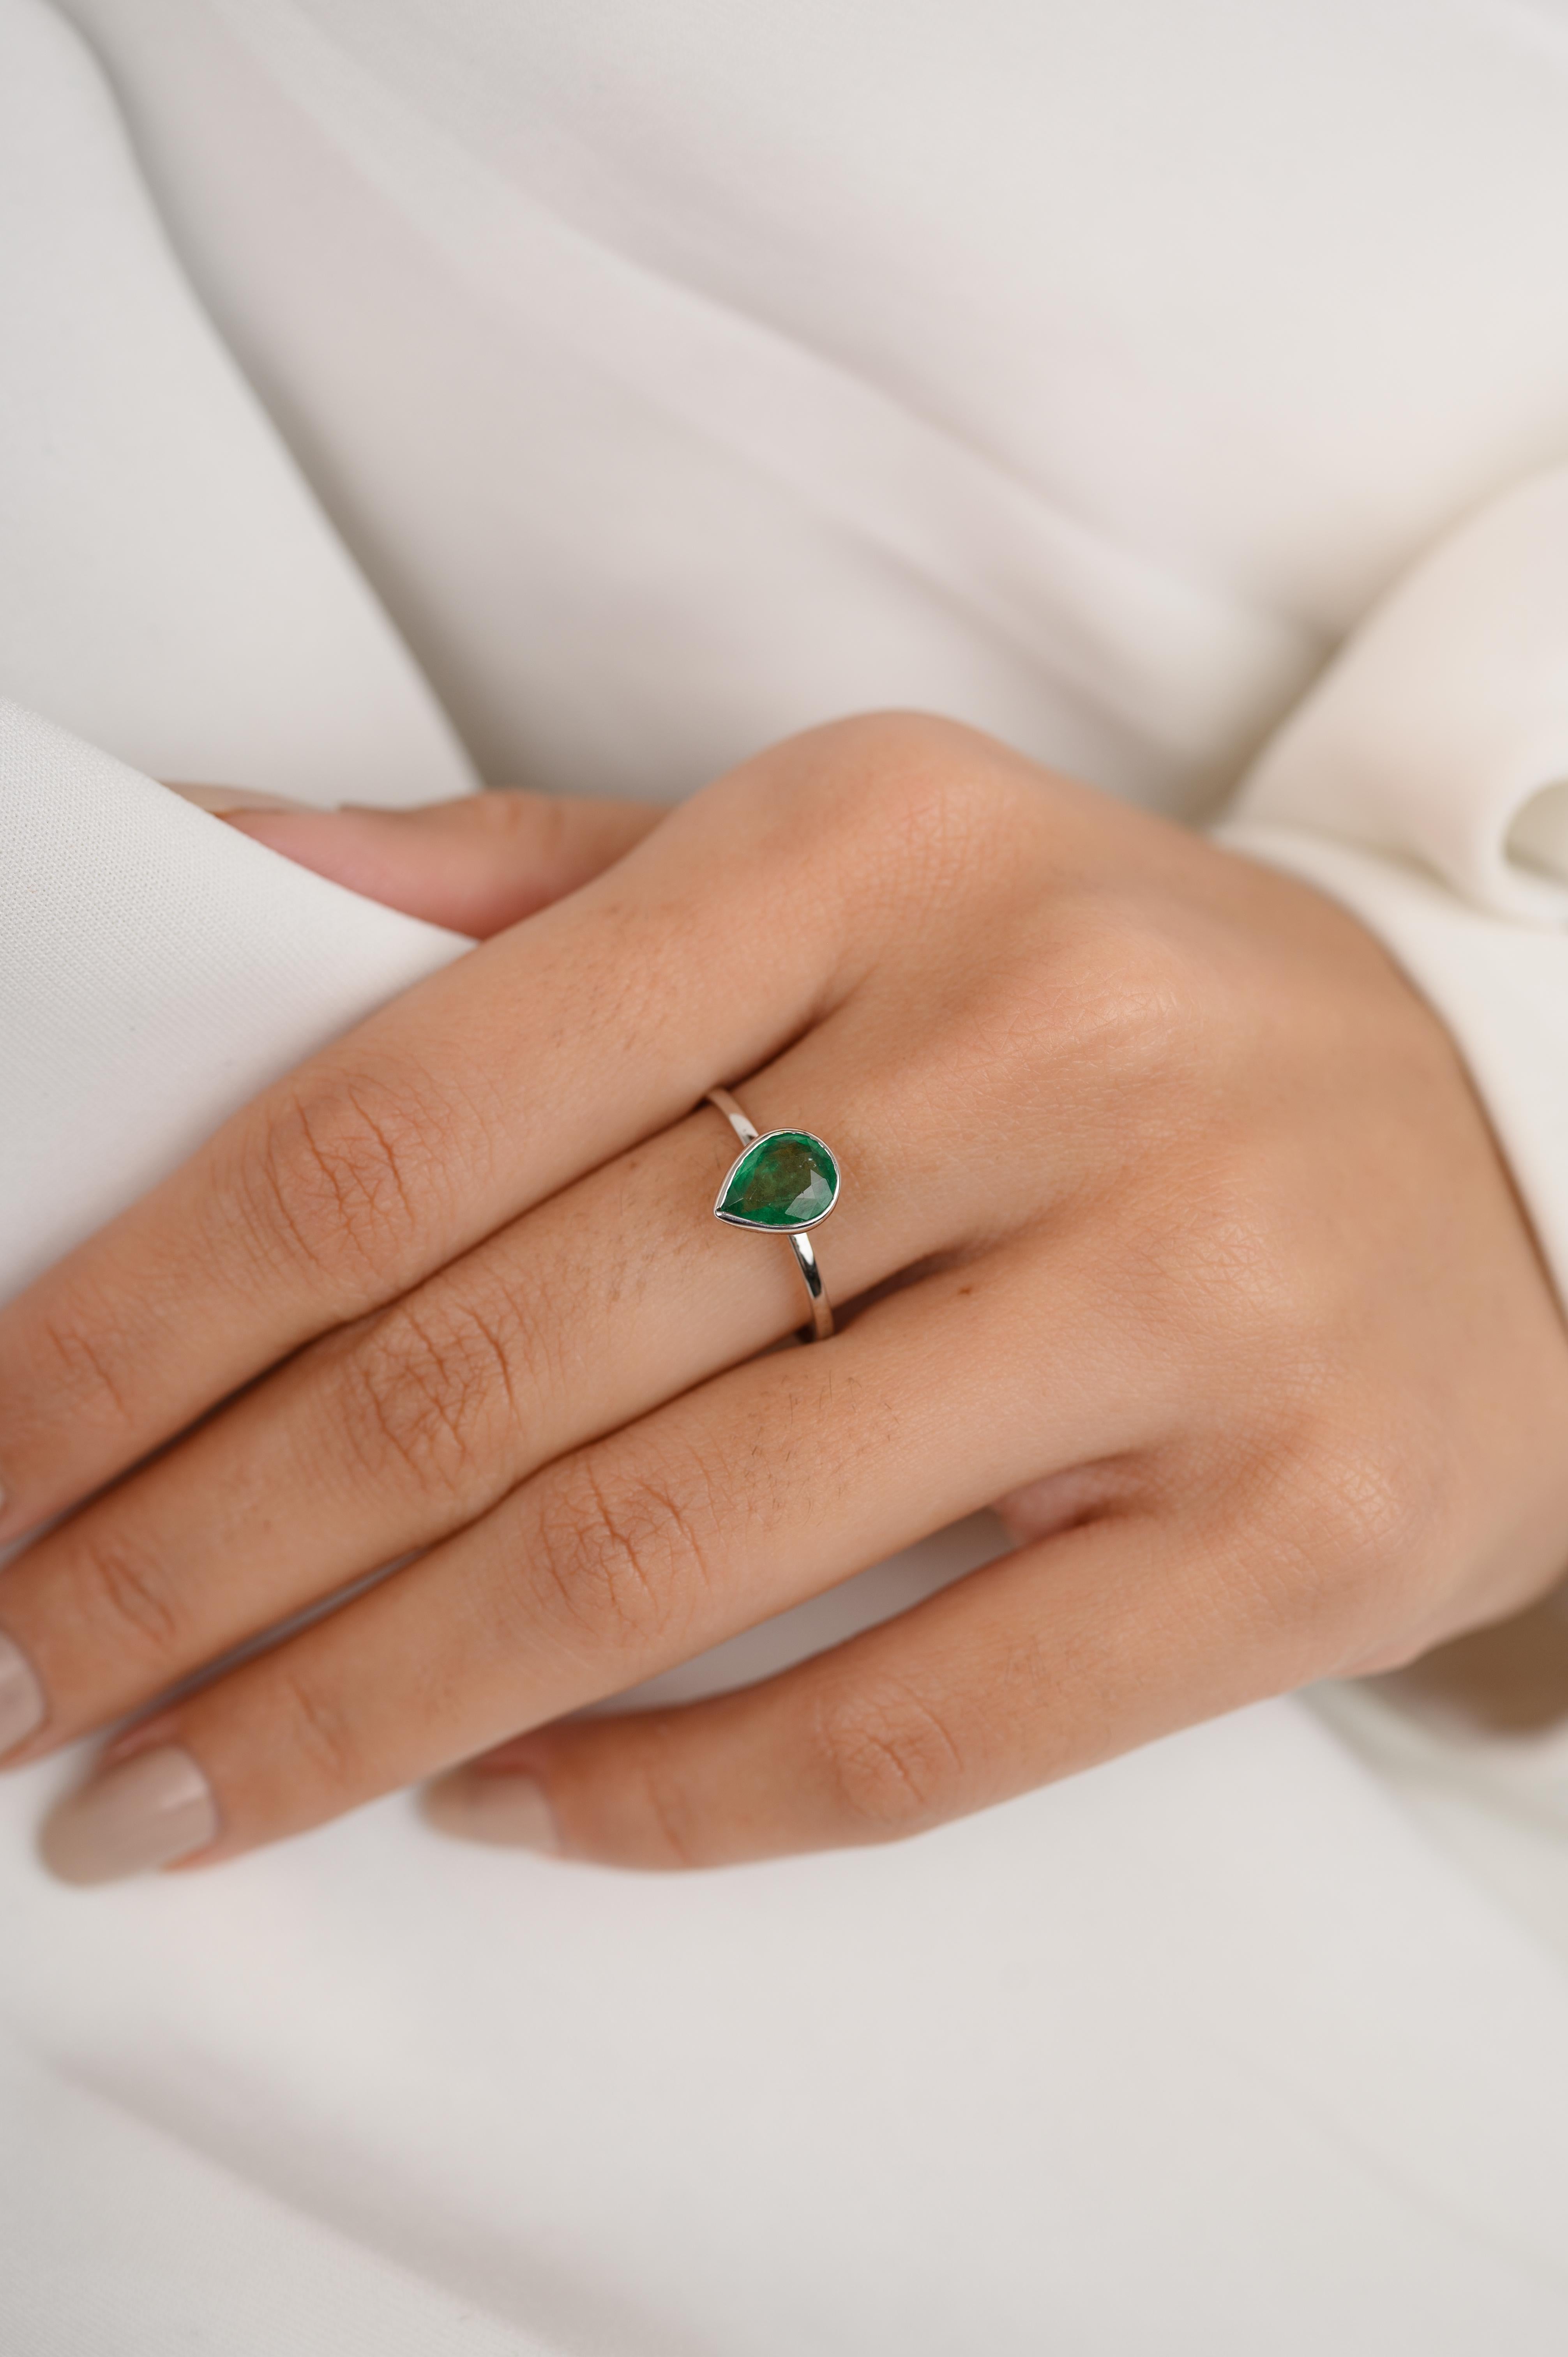 For Sale:  Natural Pear Cut Emerald Birthstone Ring Bezel Set in 18k White Gold Settings 2